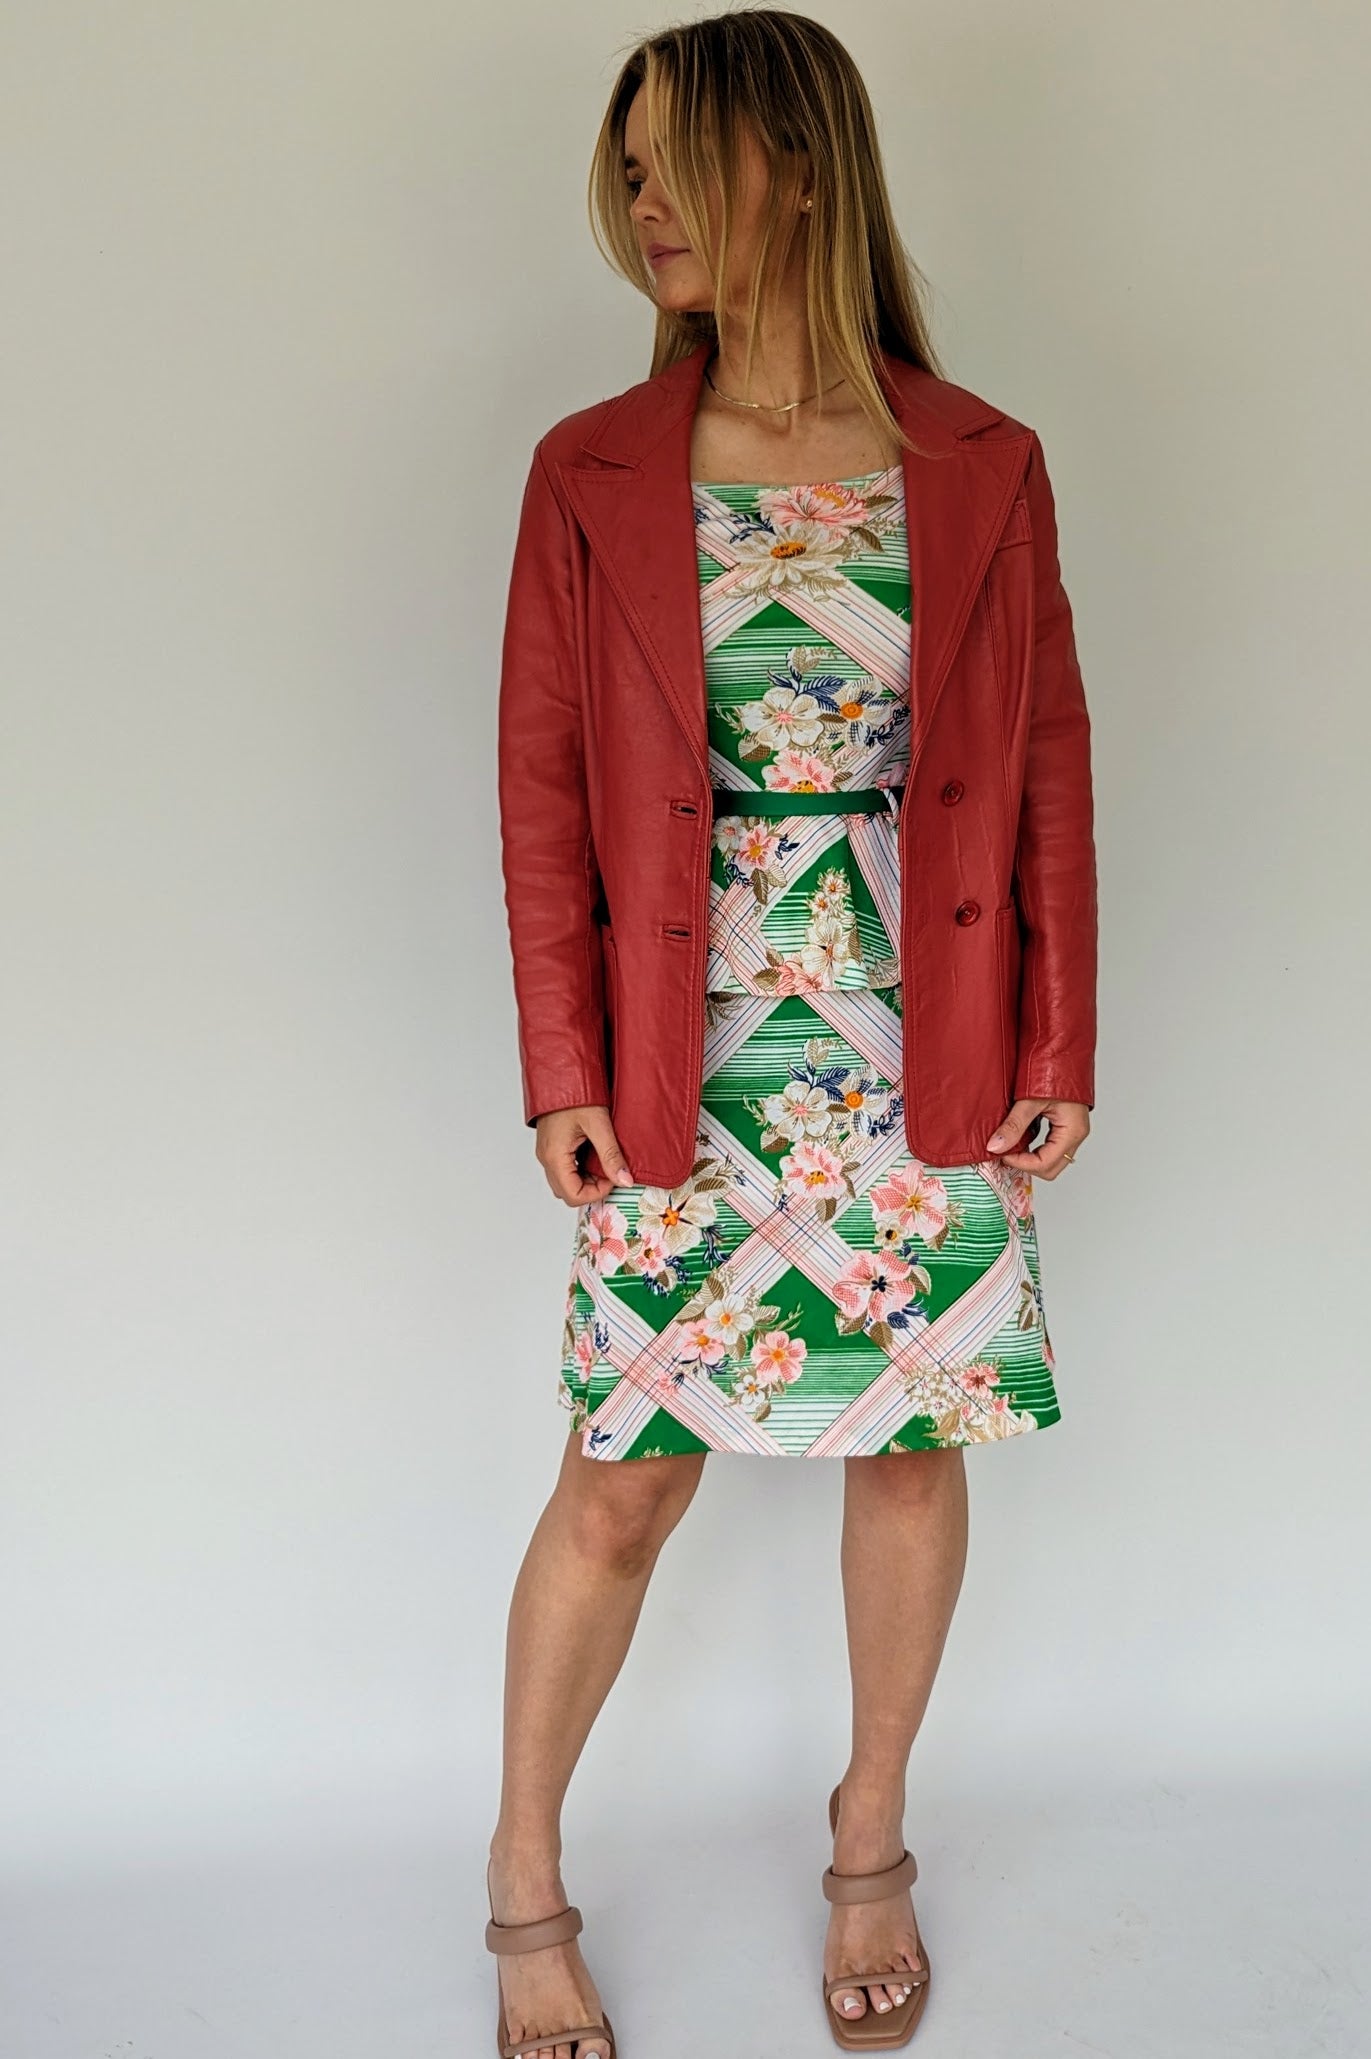 vintage tropical patterned peplum dress with green belt in white, green and pink with red leather jacket over